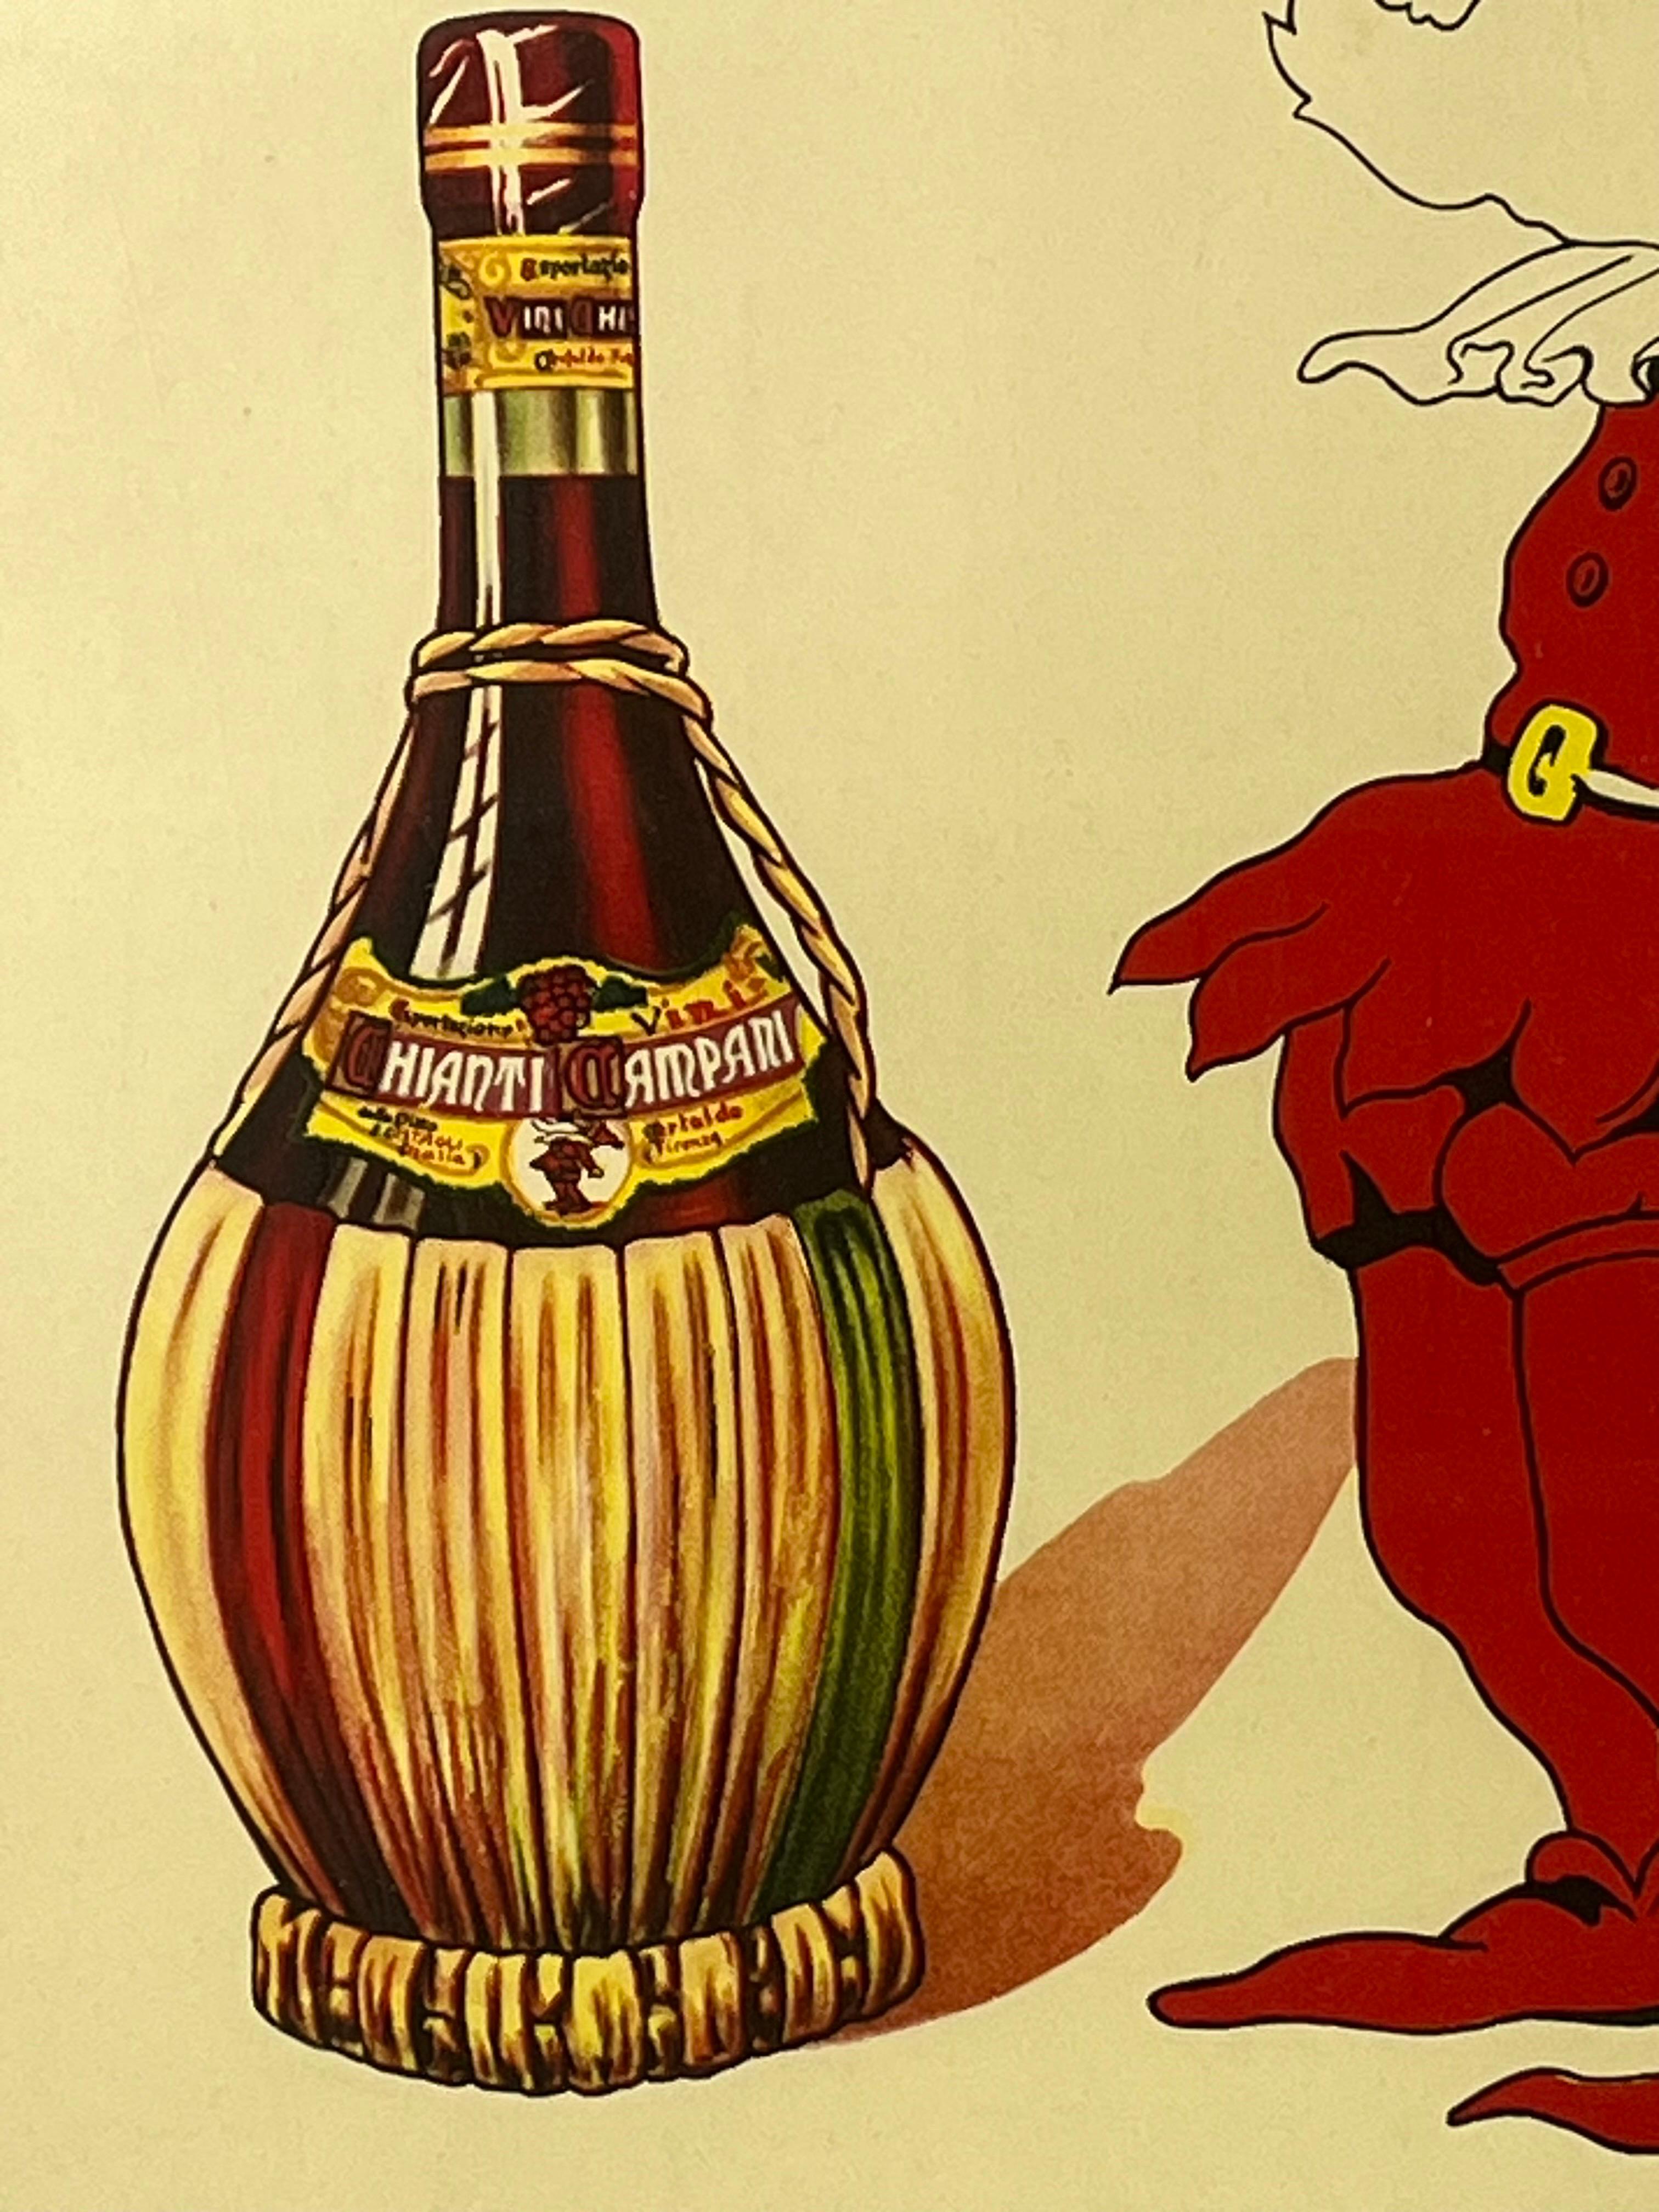 Chianti Campani Vintage Midcentury Italian Poster Featuring a Gnome and Wine 9